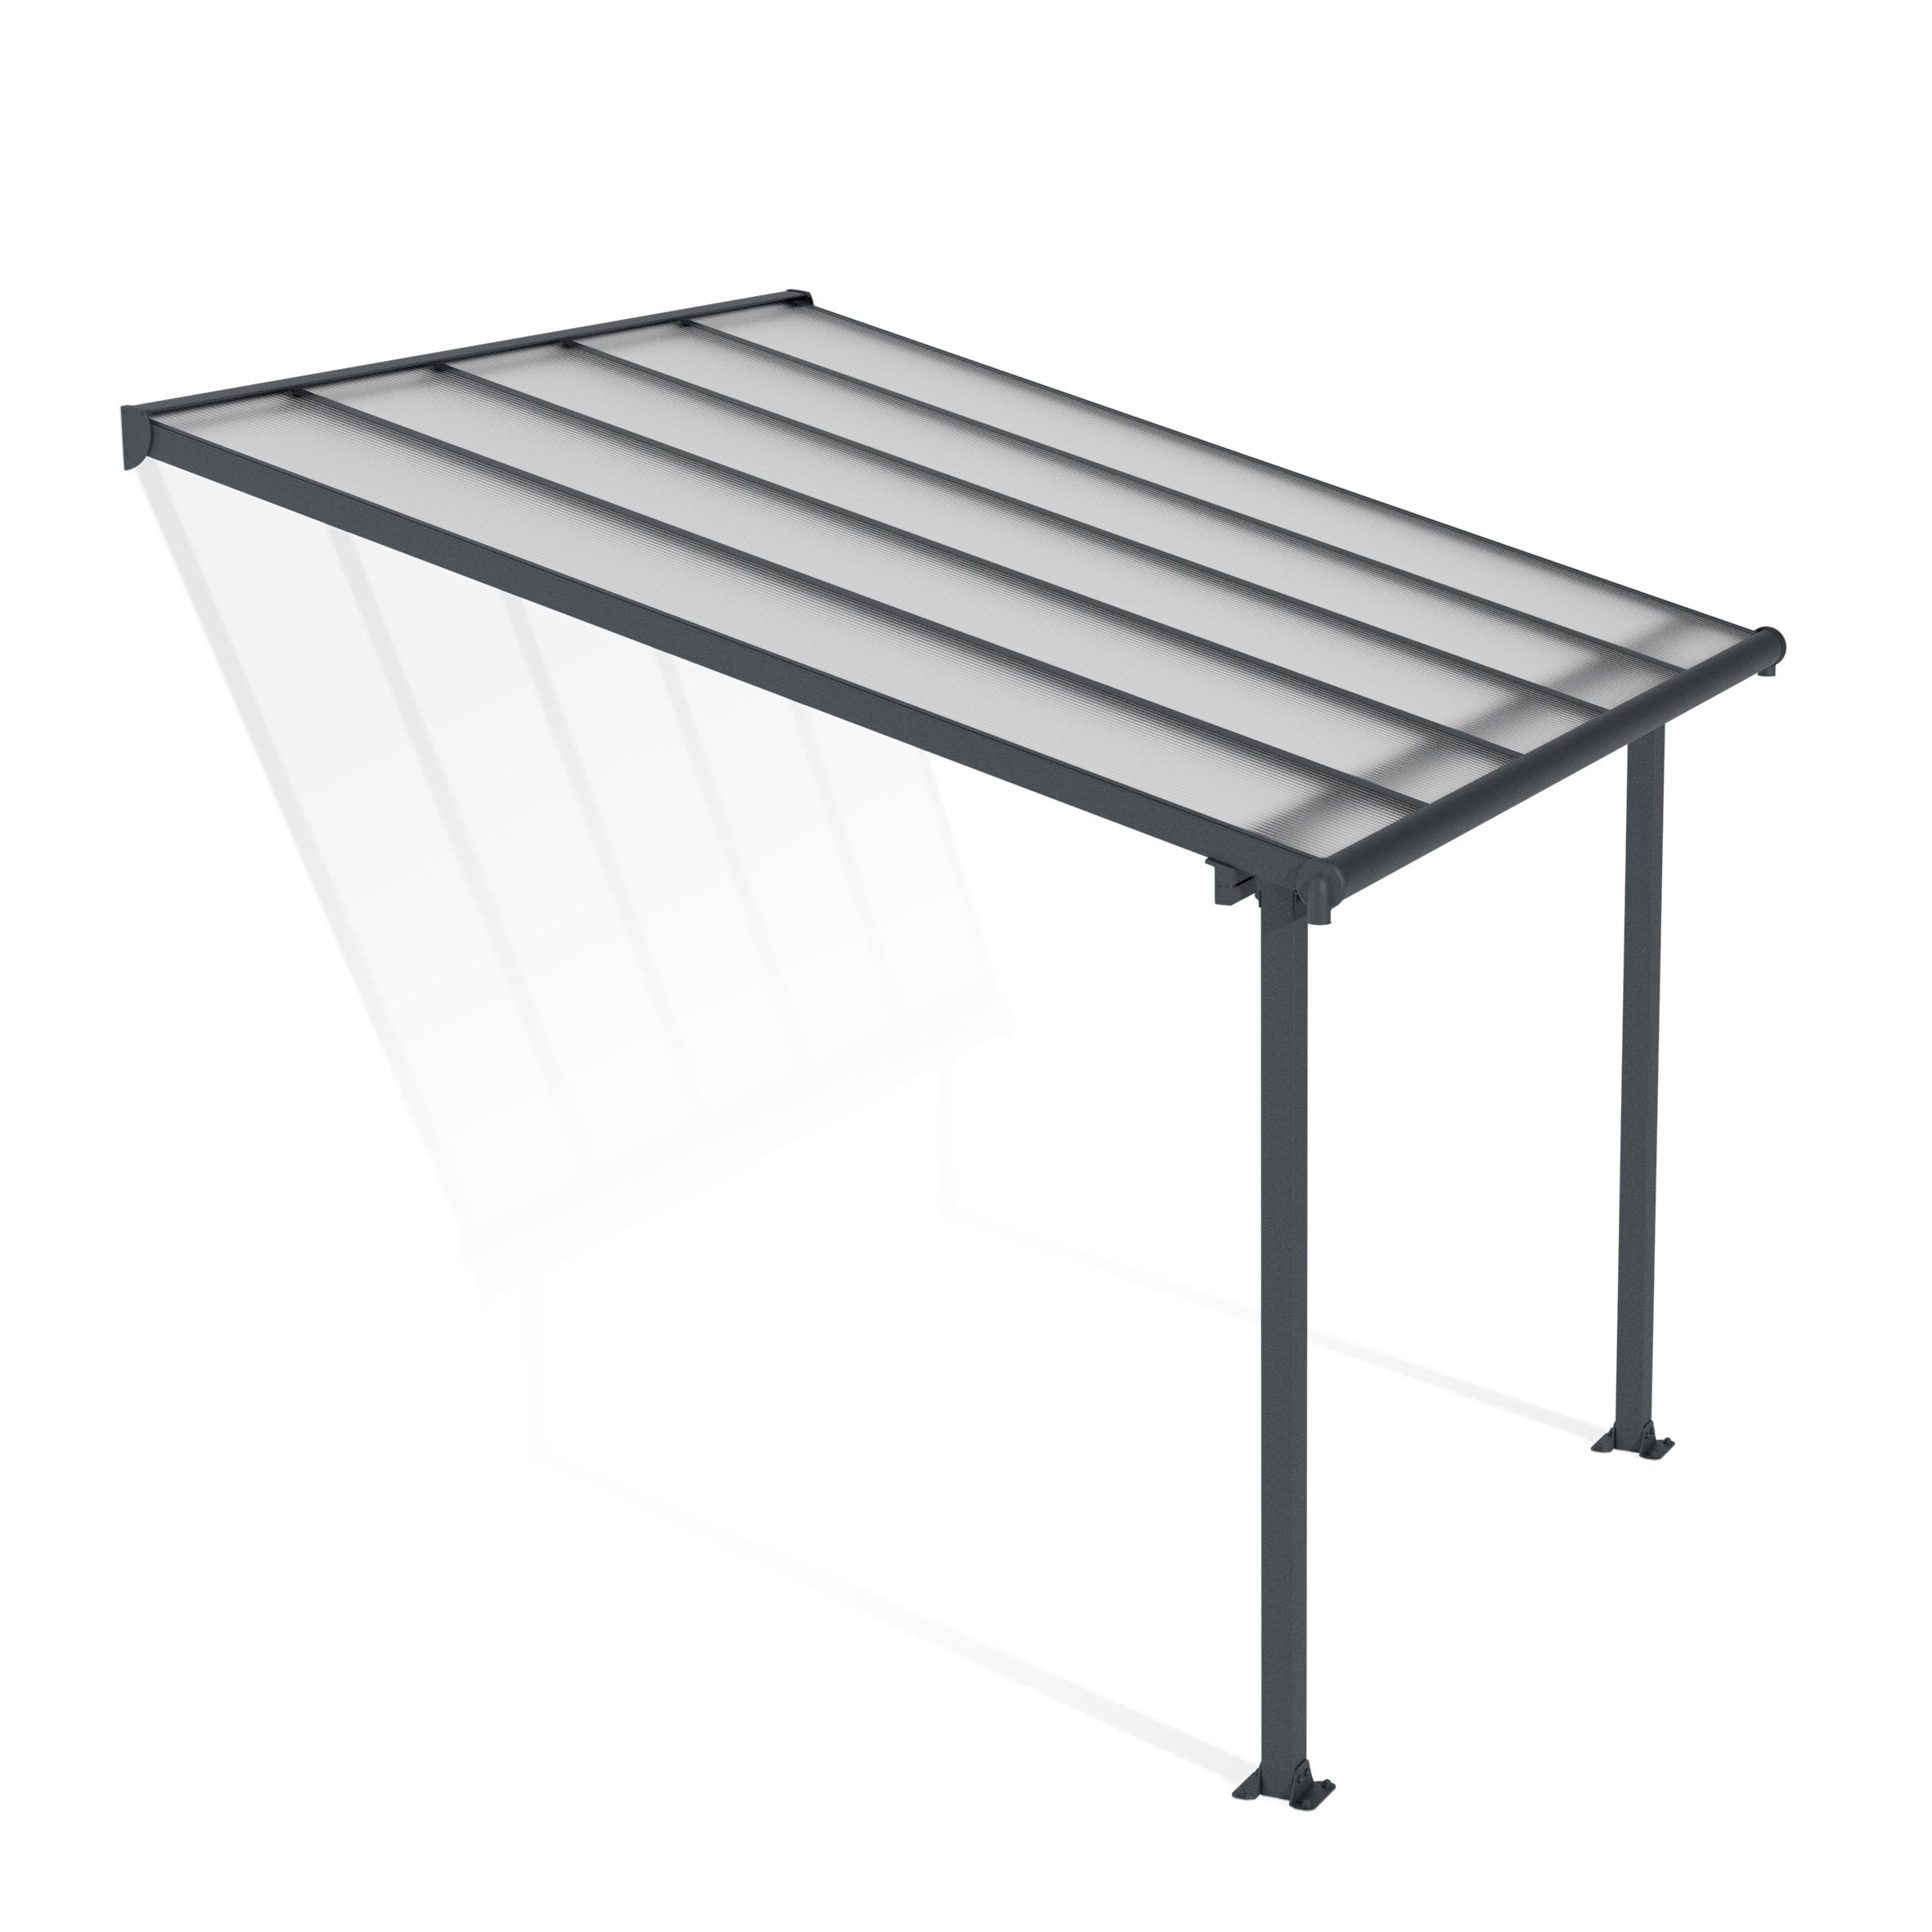 Olympia Grey Patio cover (H)3050mm (W)2950mm (D)3050mm